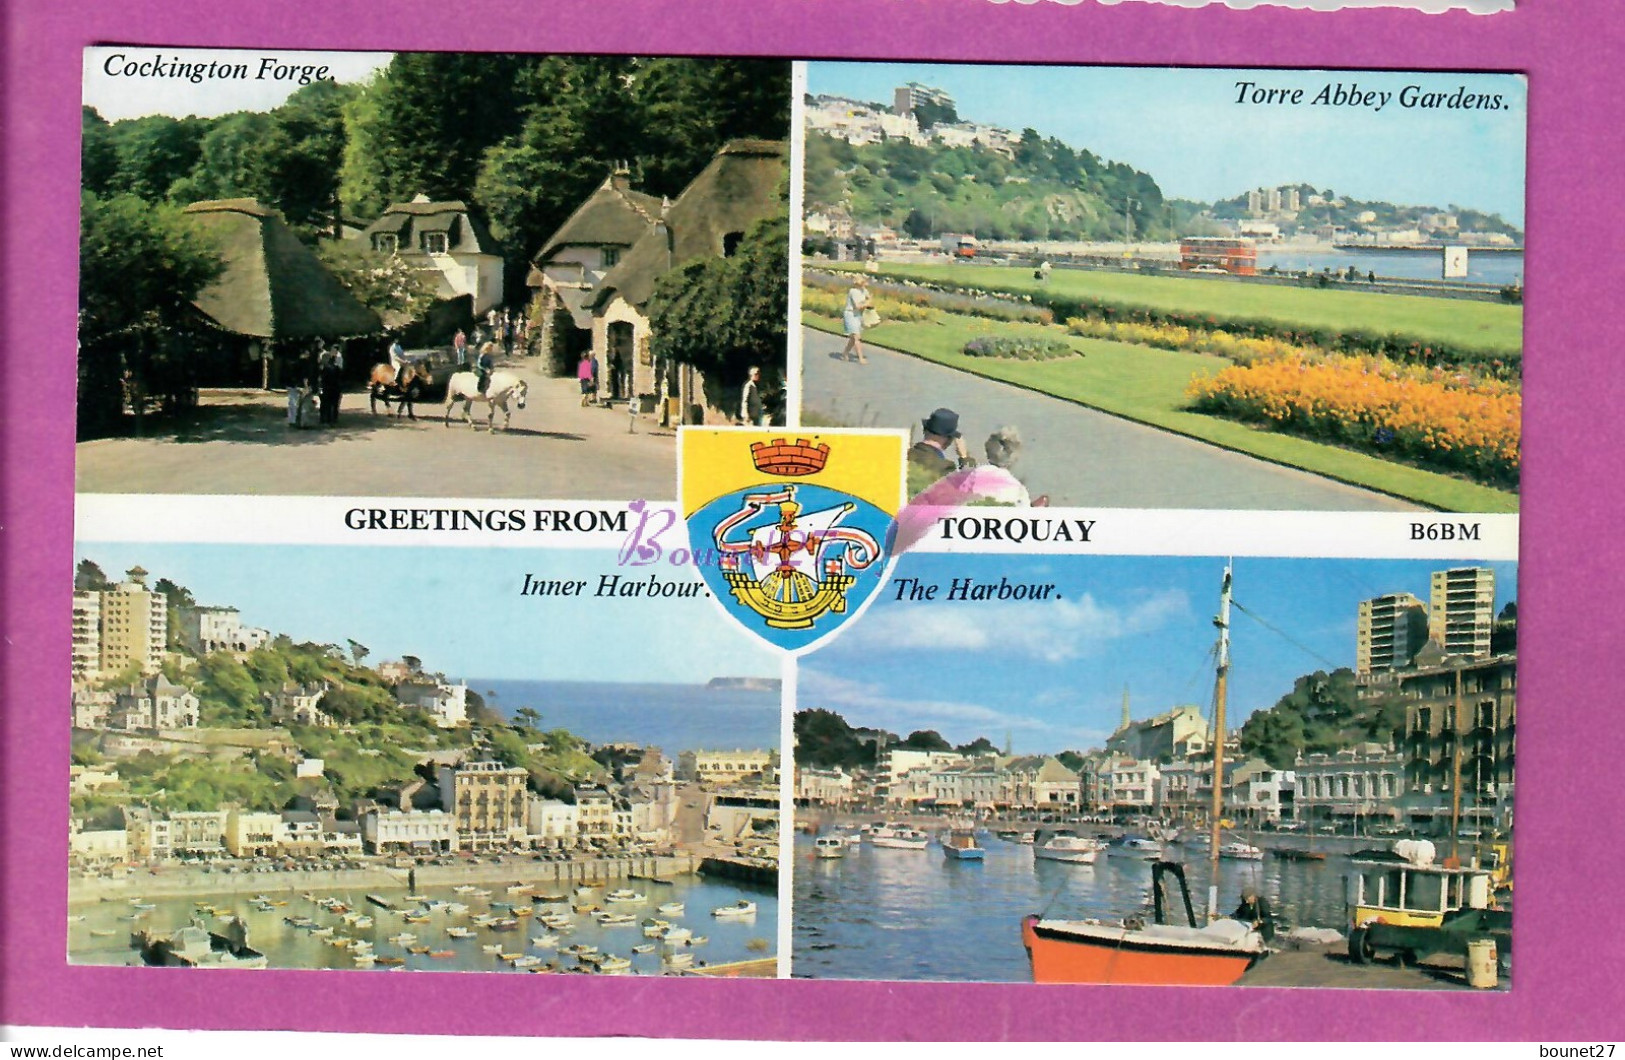 CPSM ANGLETERRE - TORQUAY Greetings From Cockington Forge Inner Harbour Torre Abbay Gardens - Torquay